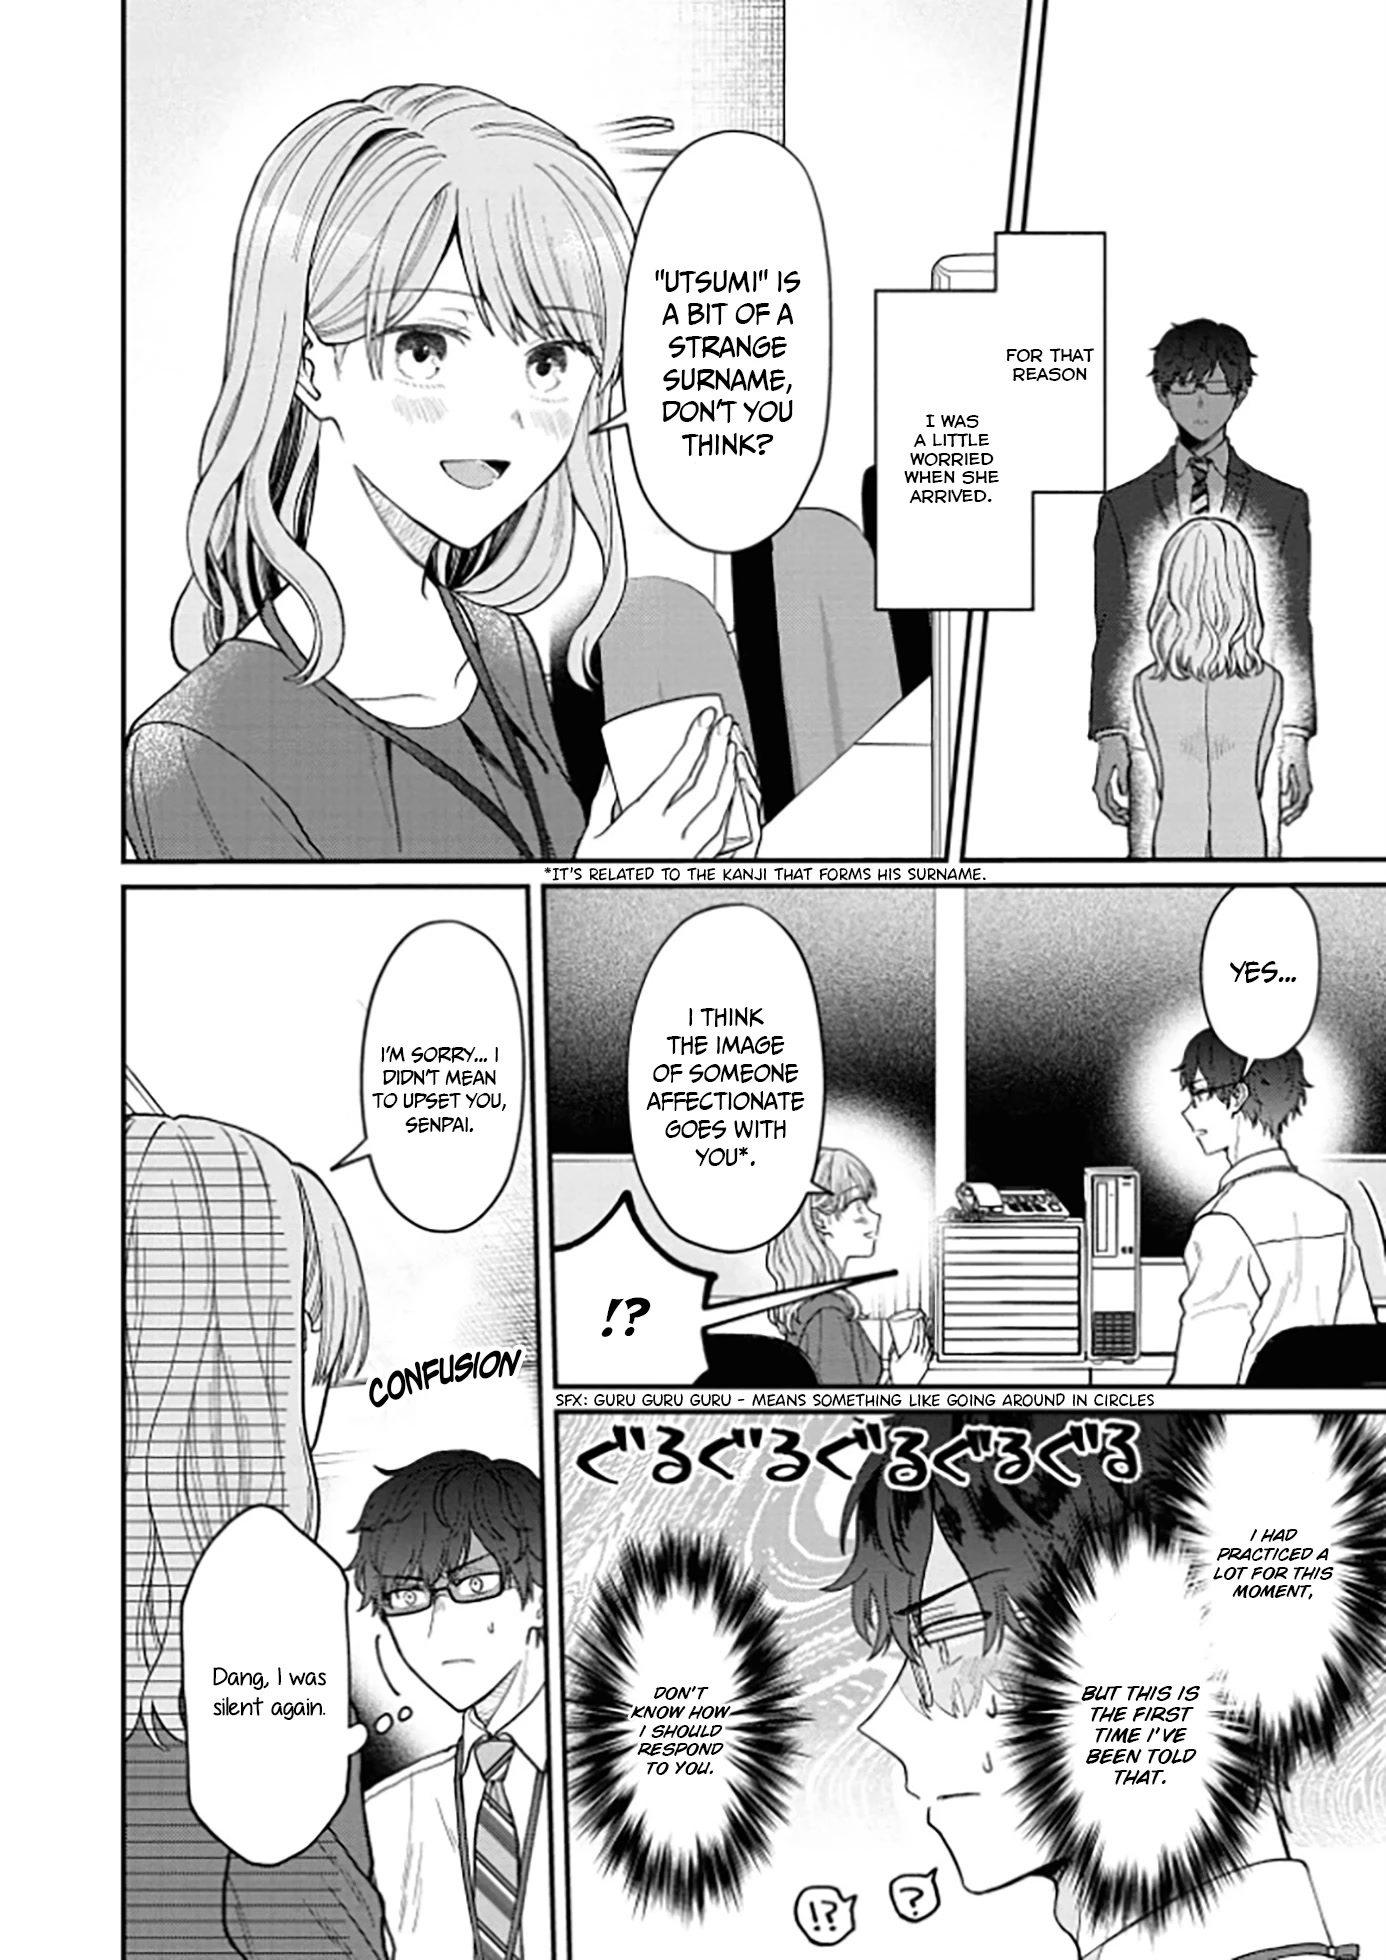 The New-Hire Who Could "Read" Emotions and the Unsociable Senpai - chapter 10 - #5